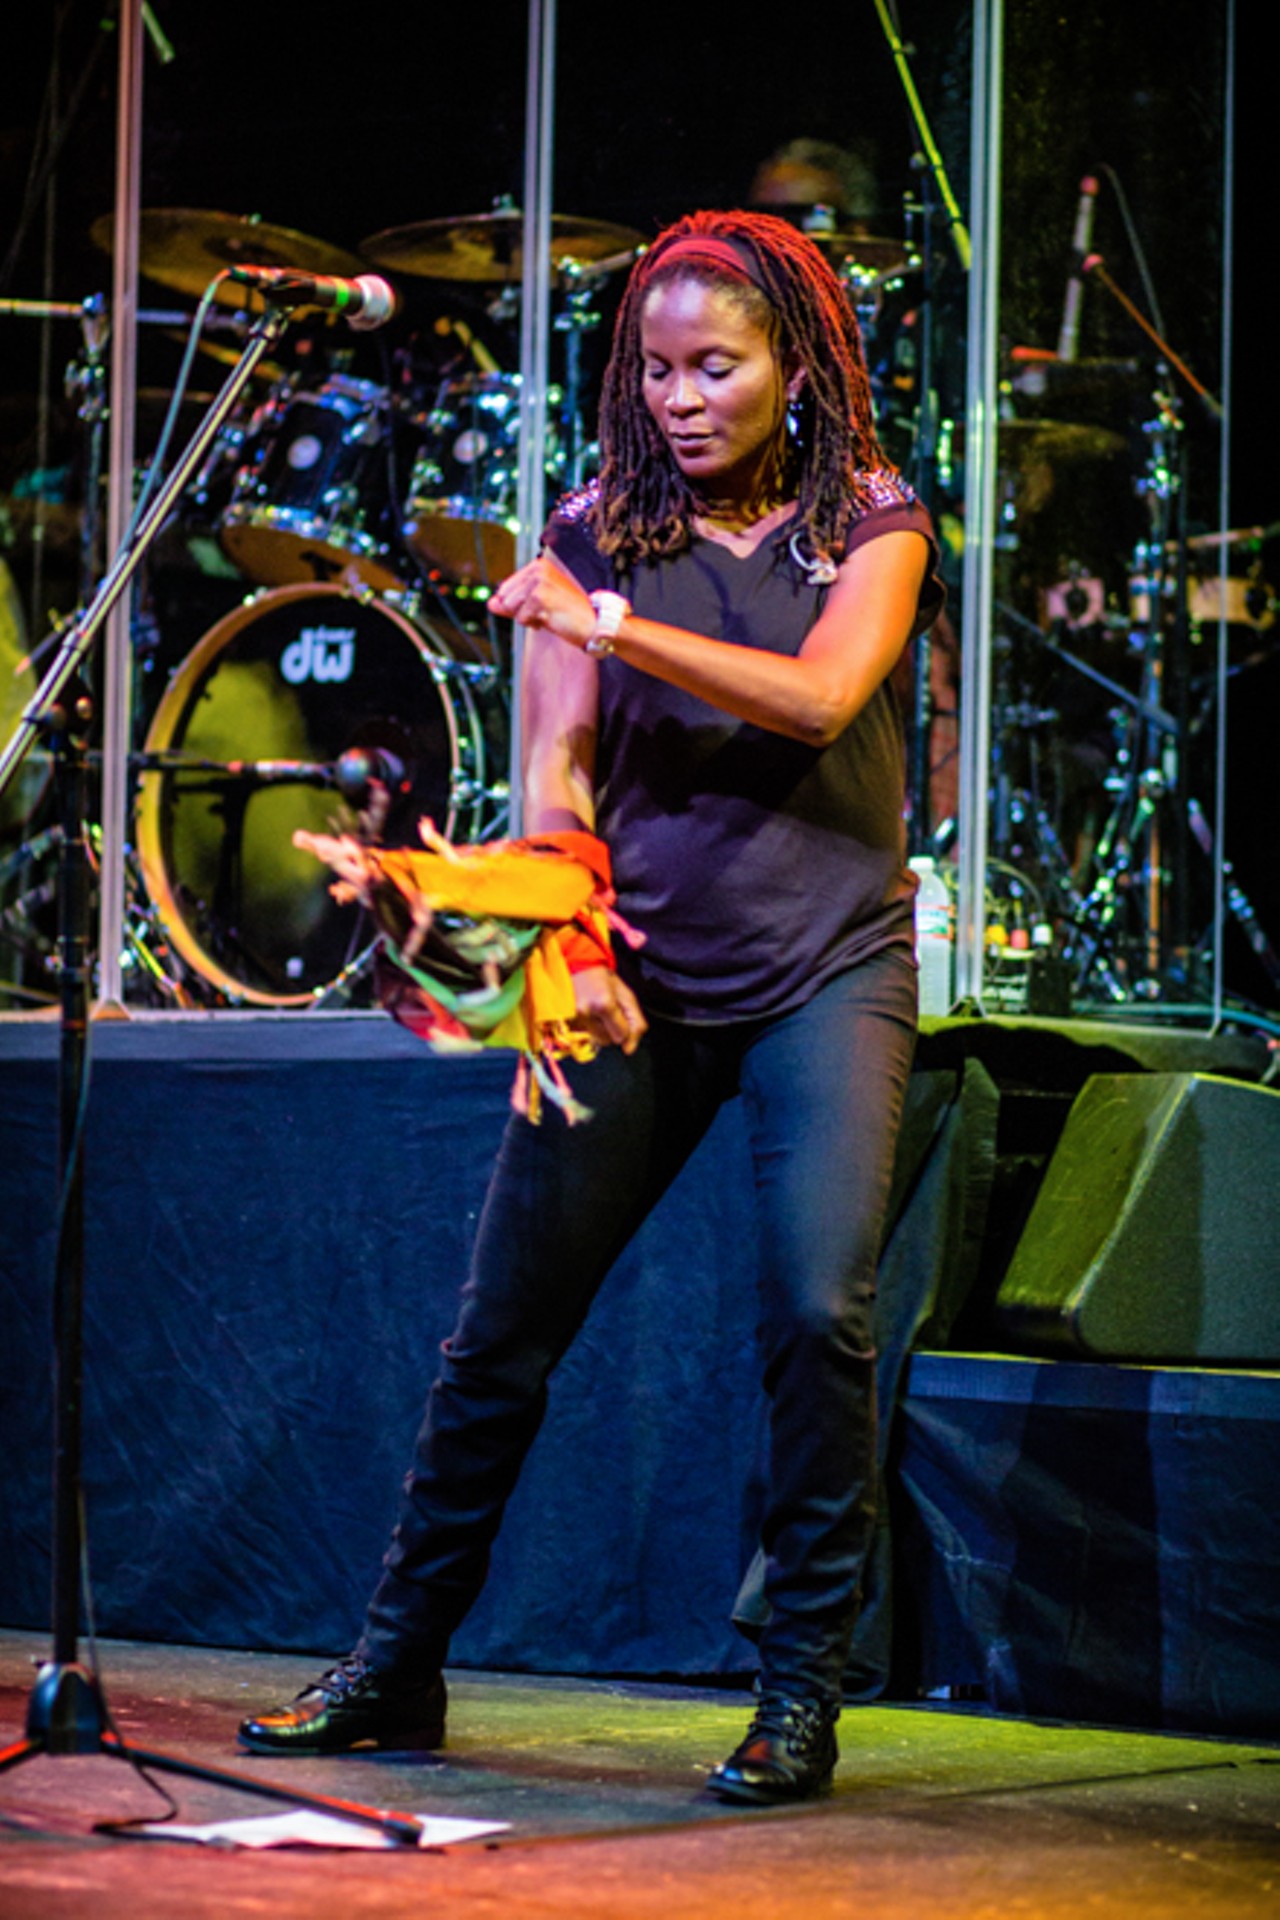 Steppin' out: Photos from Steel Pulse at the Plaza Live